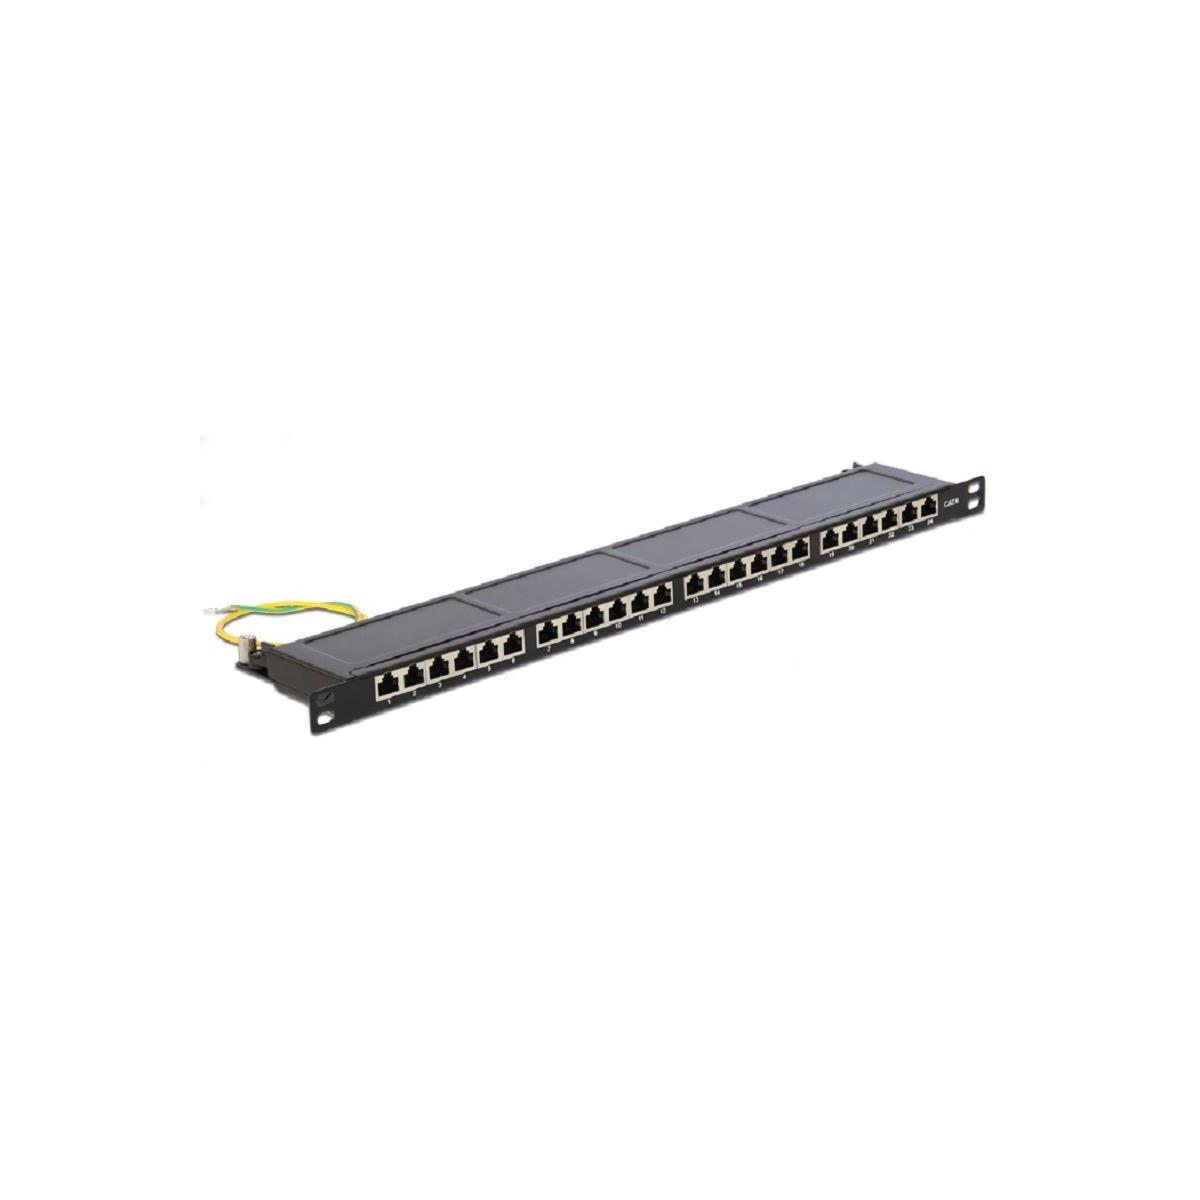 43316 Patchpanel DELOCK